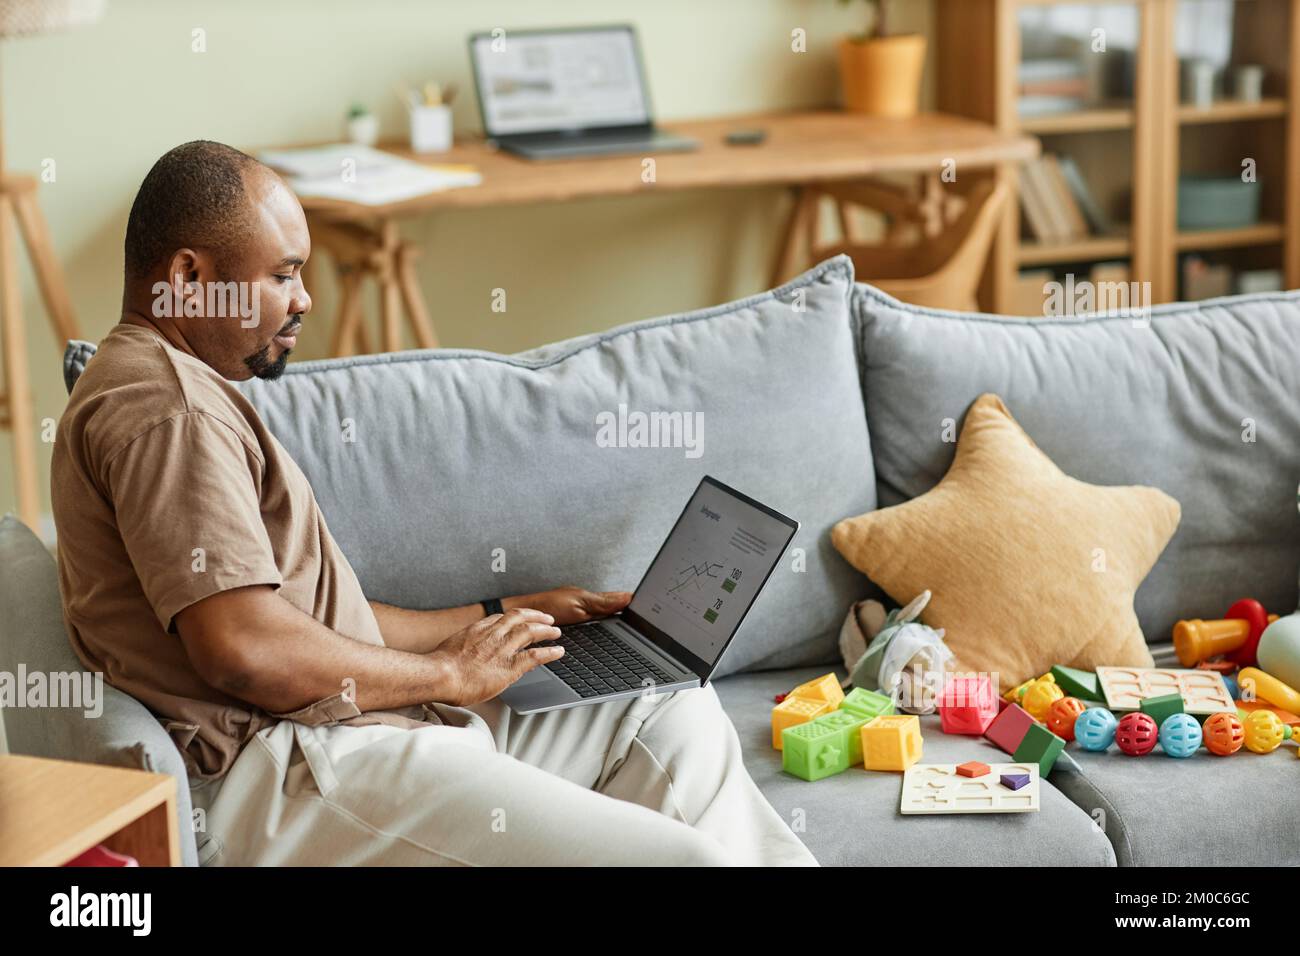 Side view portrait of single father working from home and using laptop on couch with toys, copy space Stock Photo